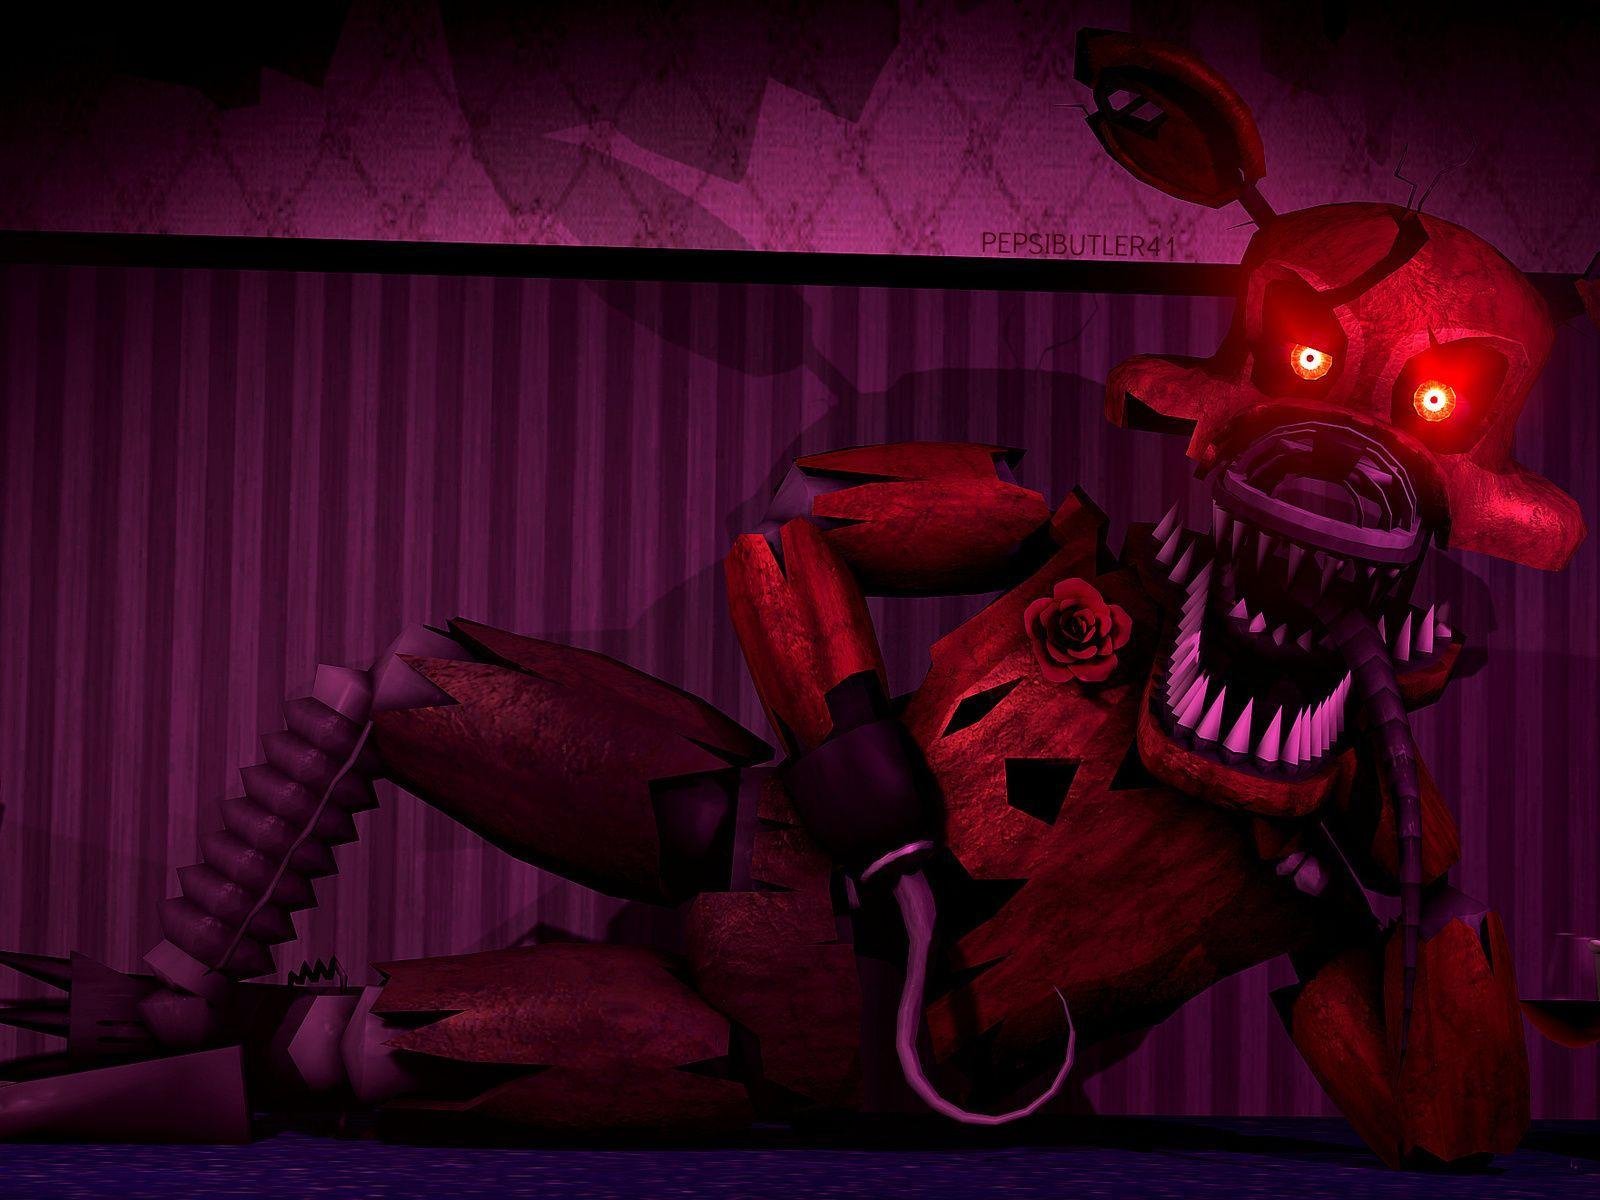 Night фокси. Five Nights at Freddy's Фокси. Кошмарный Бонни и кошмарный Фокси. FNAF Фокси.